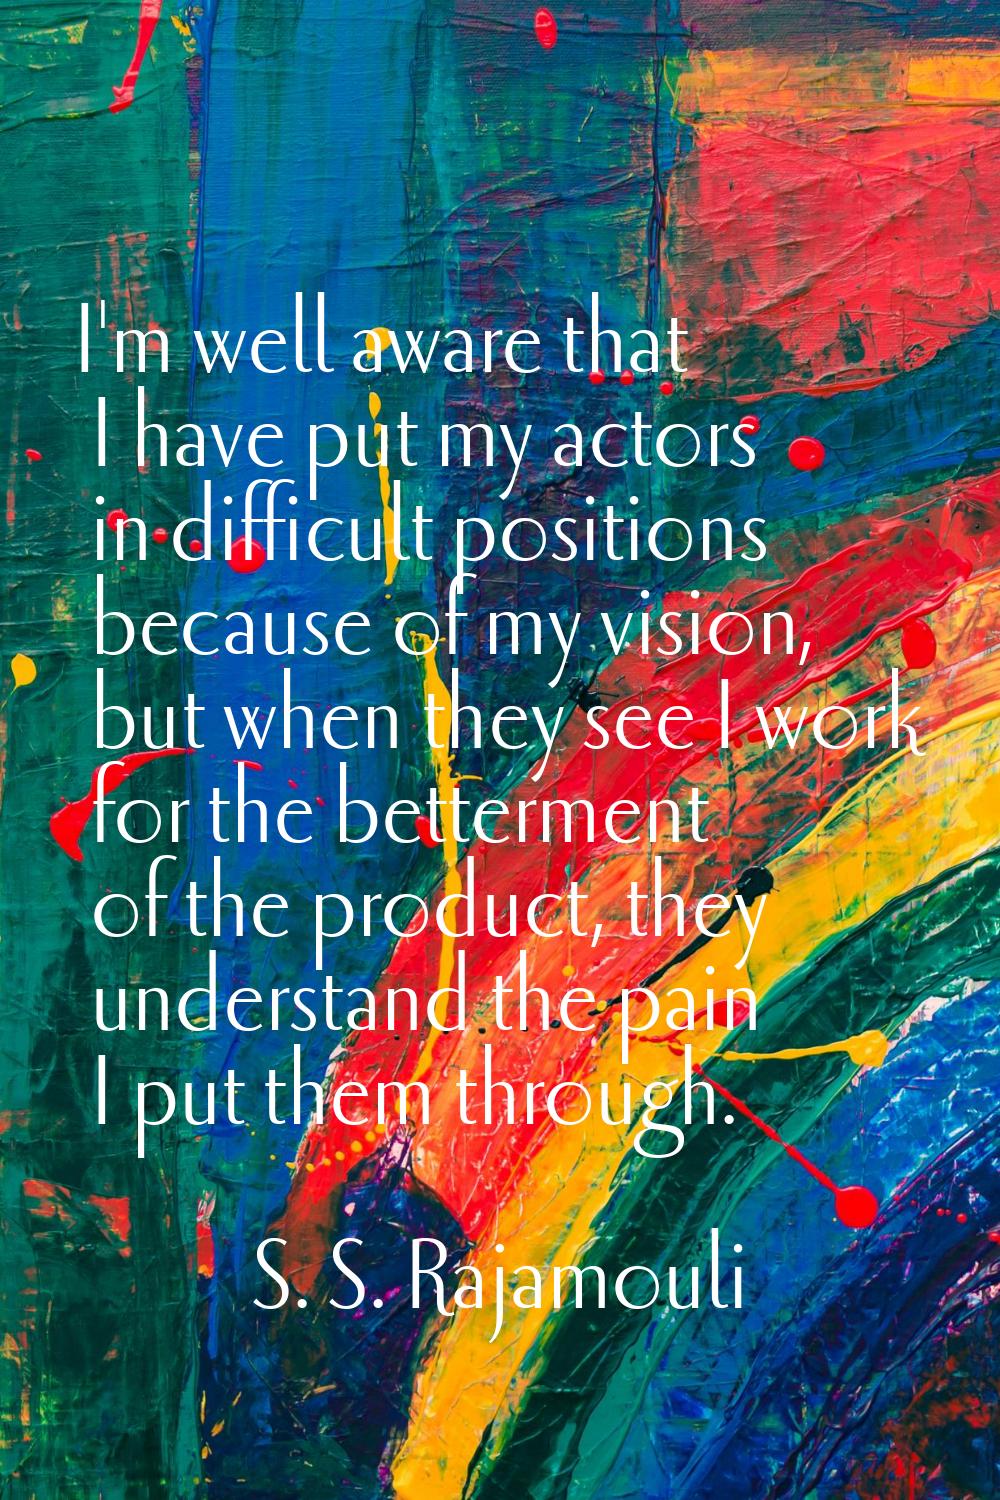 I'm well aware that I have put my actors in difficult positions because of my vision, but when they